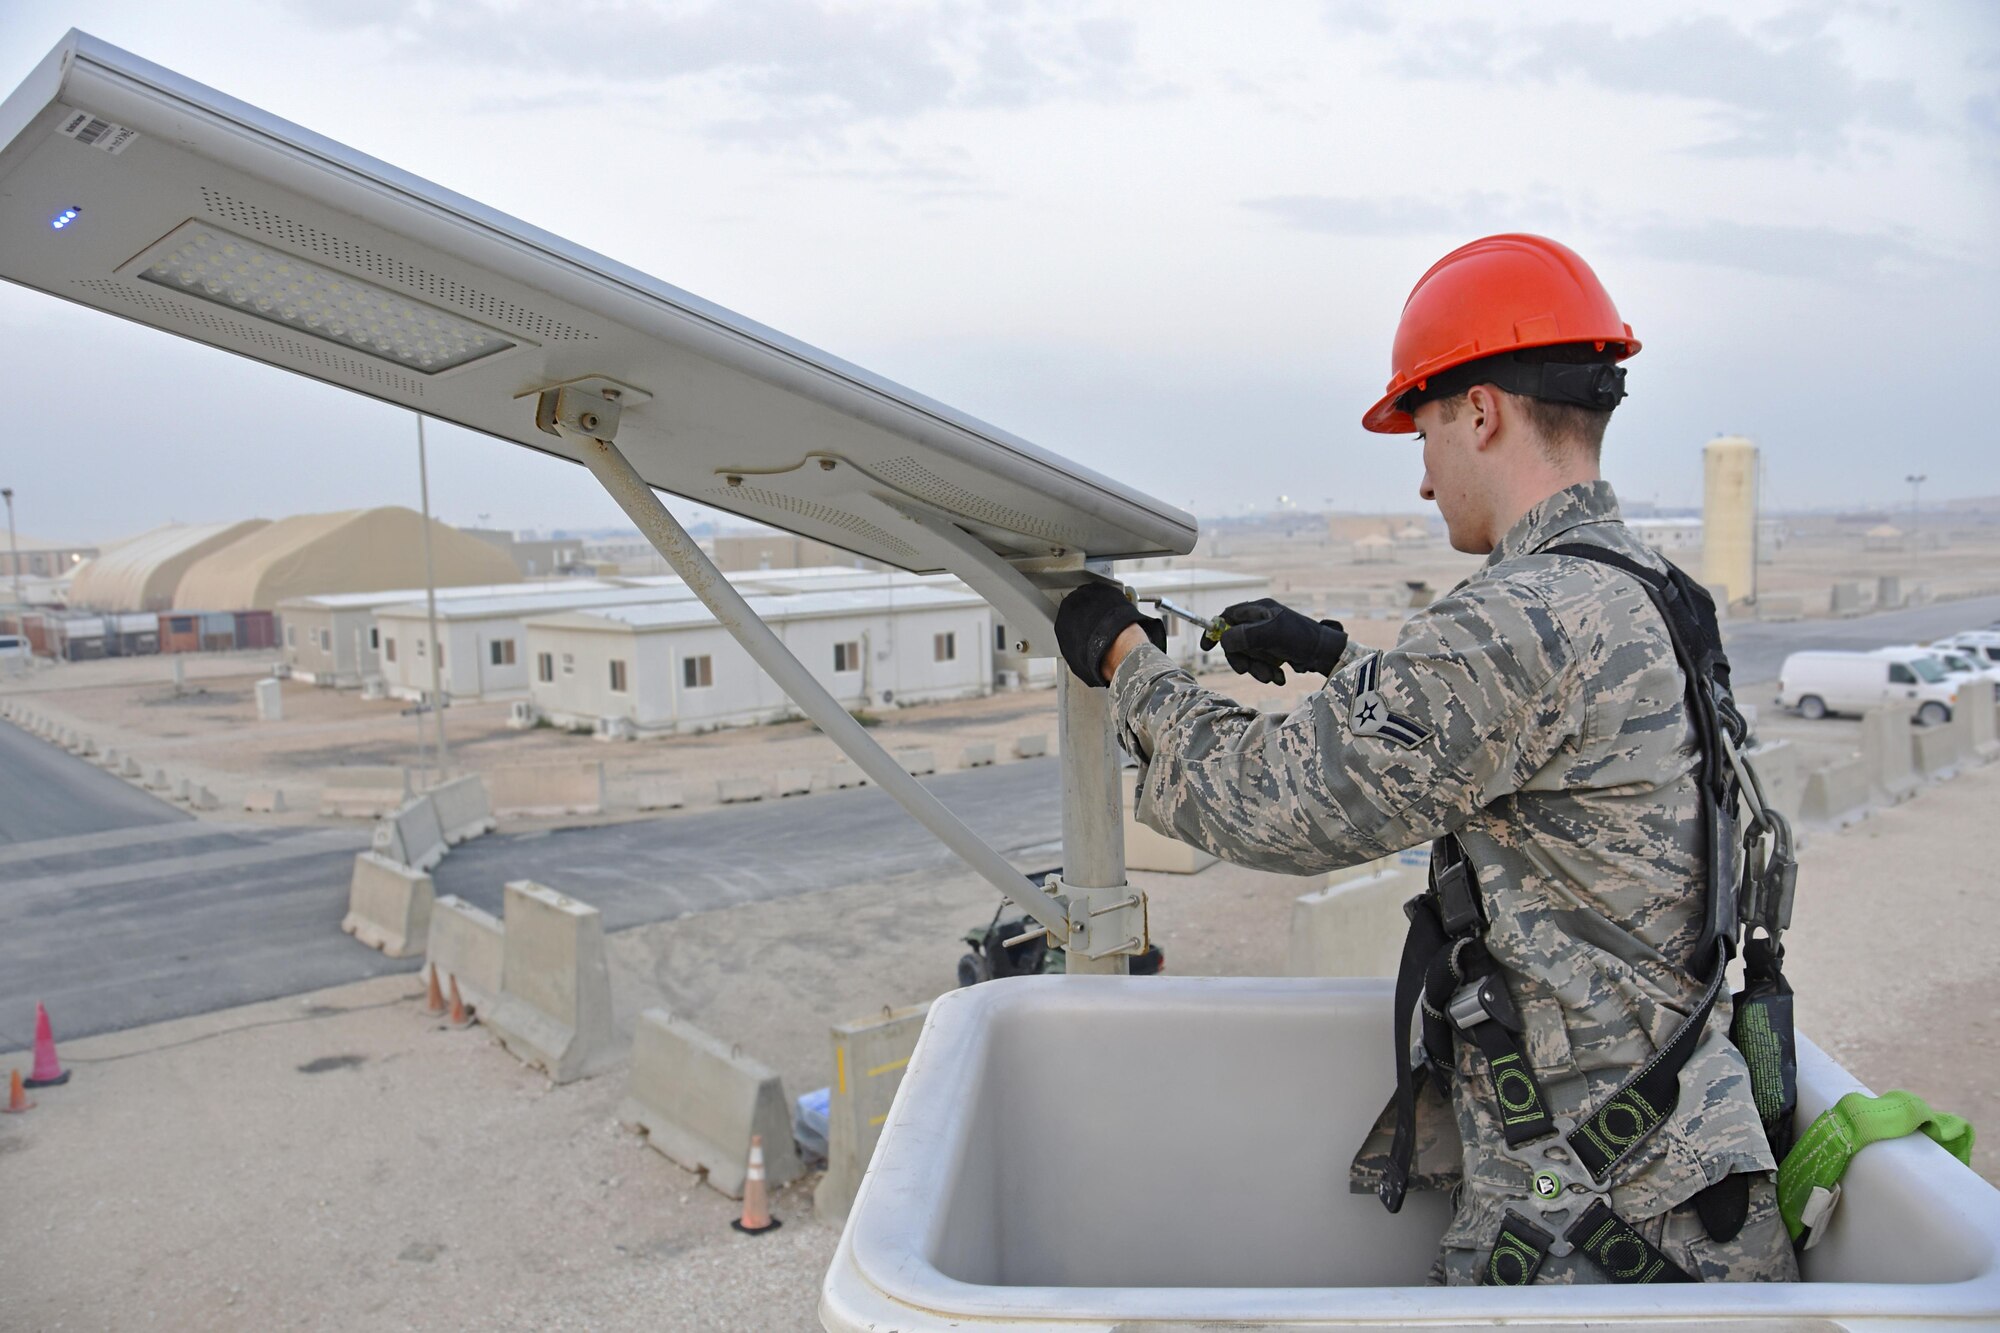 U.S. Air Force Airman 1st Class Corey Martin, an electrical systems apprentice with the 379th Expeditionary Civil Engineer Squadron, adjusts a light fixture at Al Udeid Air Base, Qatar, Feb. 22, 2017. Airmen with the 379th ECES Electrical Systems Section maintain 67 solar-powered low-emitting diode lights in Coalition Compound, the living area side of Al Udeid, in an effort to save on utility costs. (U.S. Air Force photo by Senior Airman Cynthia A. Innocenti)